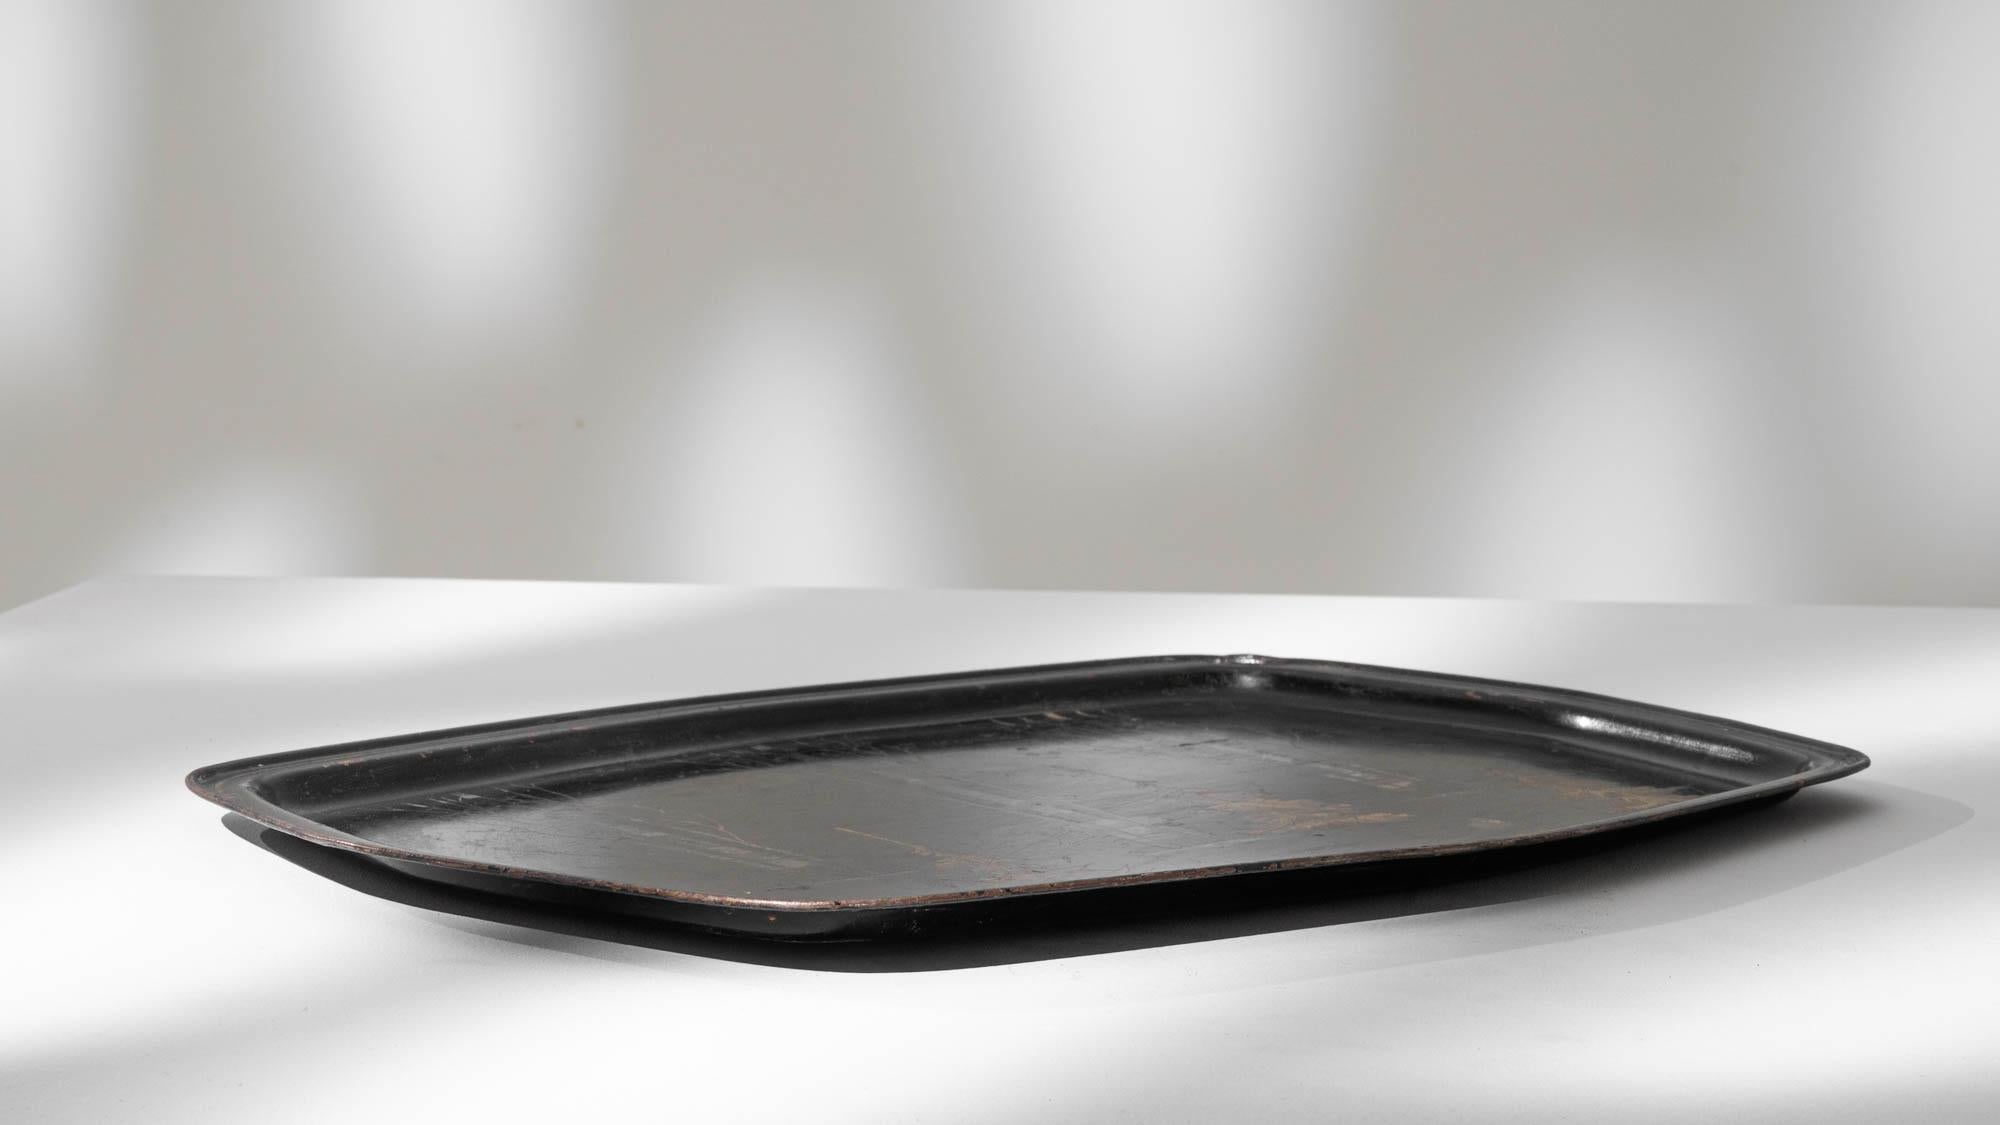 Transport yourself to the scenic beauty of the French countryside with this exquisite 1900s French metal tray. Crafted with meticulous attention to detail, the black tray serves as a canvas for a captivating depiction of nature's splendor. Delicate